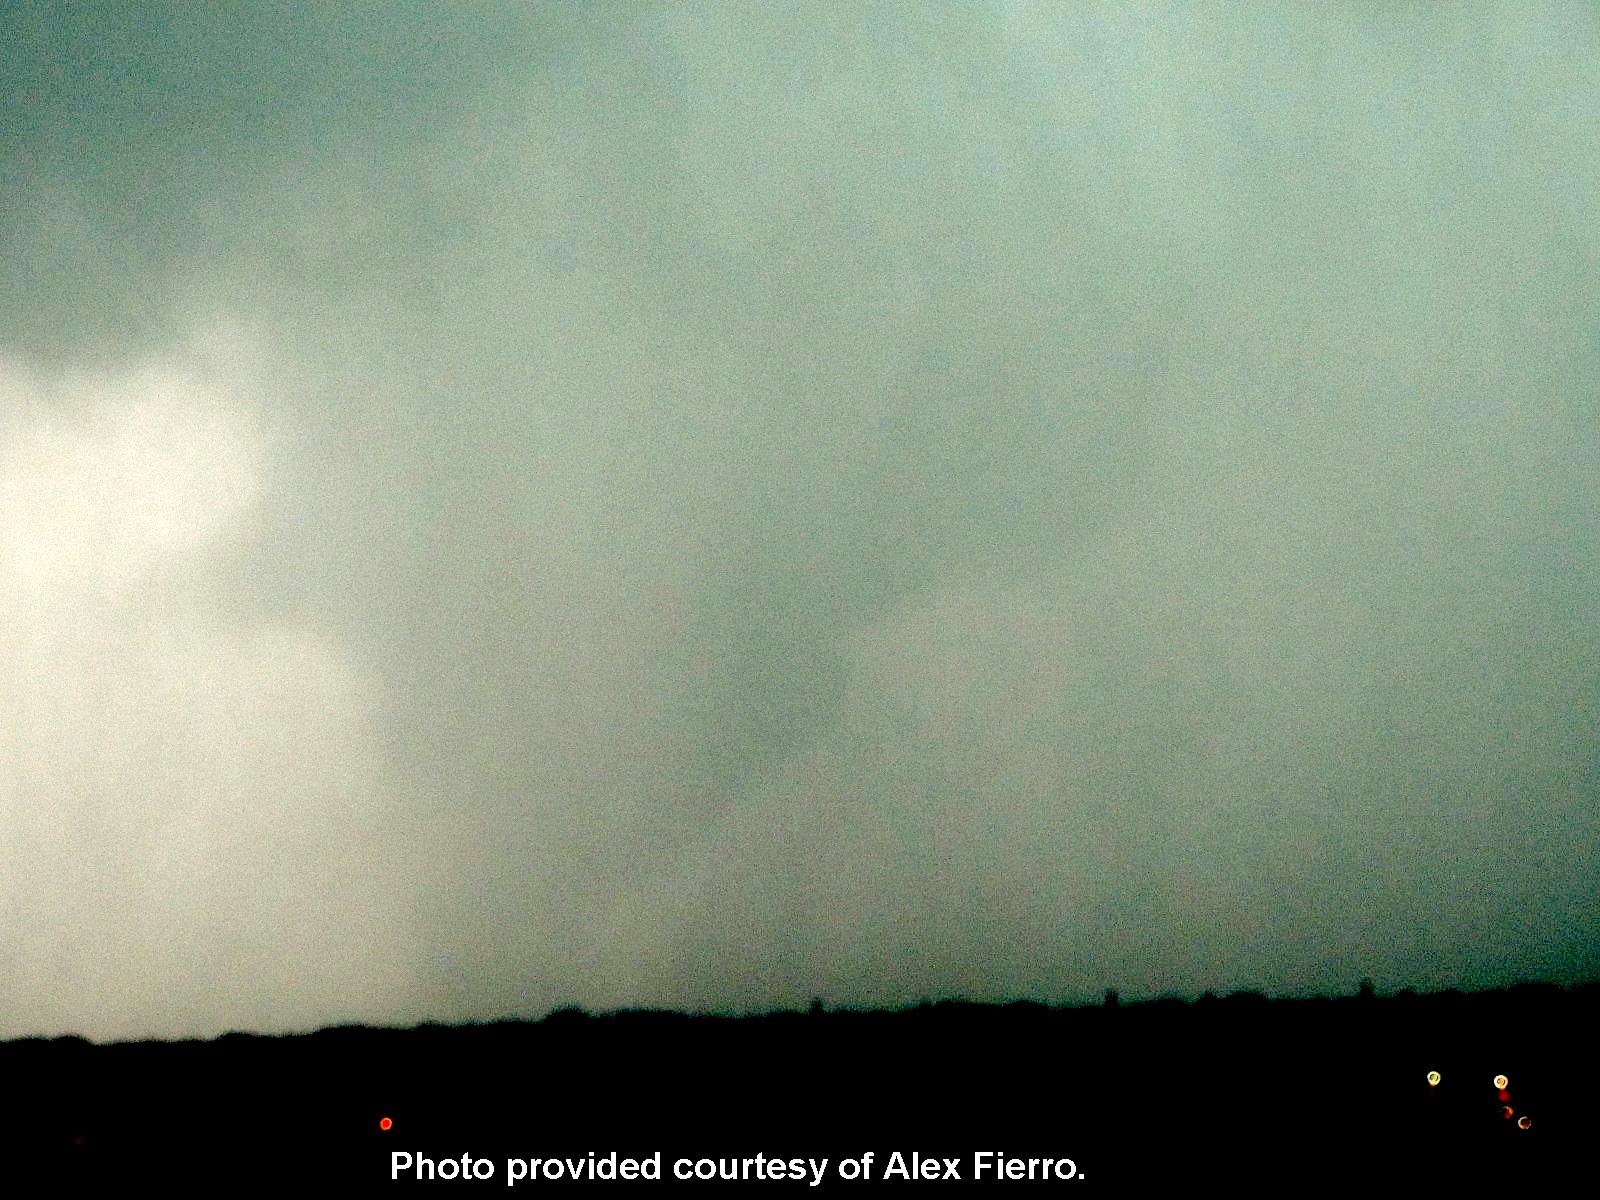 Photo of the April 13, 2012 Norman, Oklahoma Tornado taken from the observatory deck of the National Weather Center by Alex Fierro.